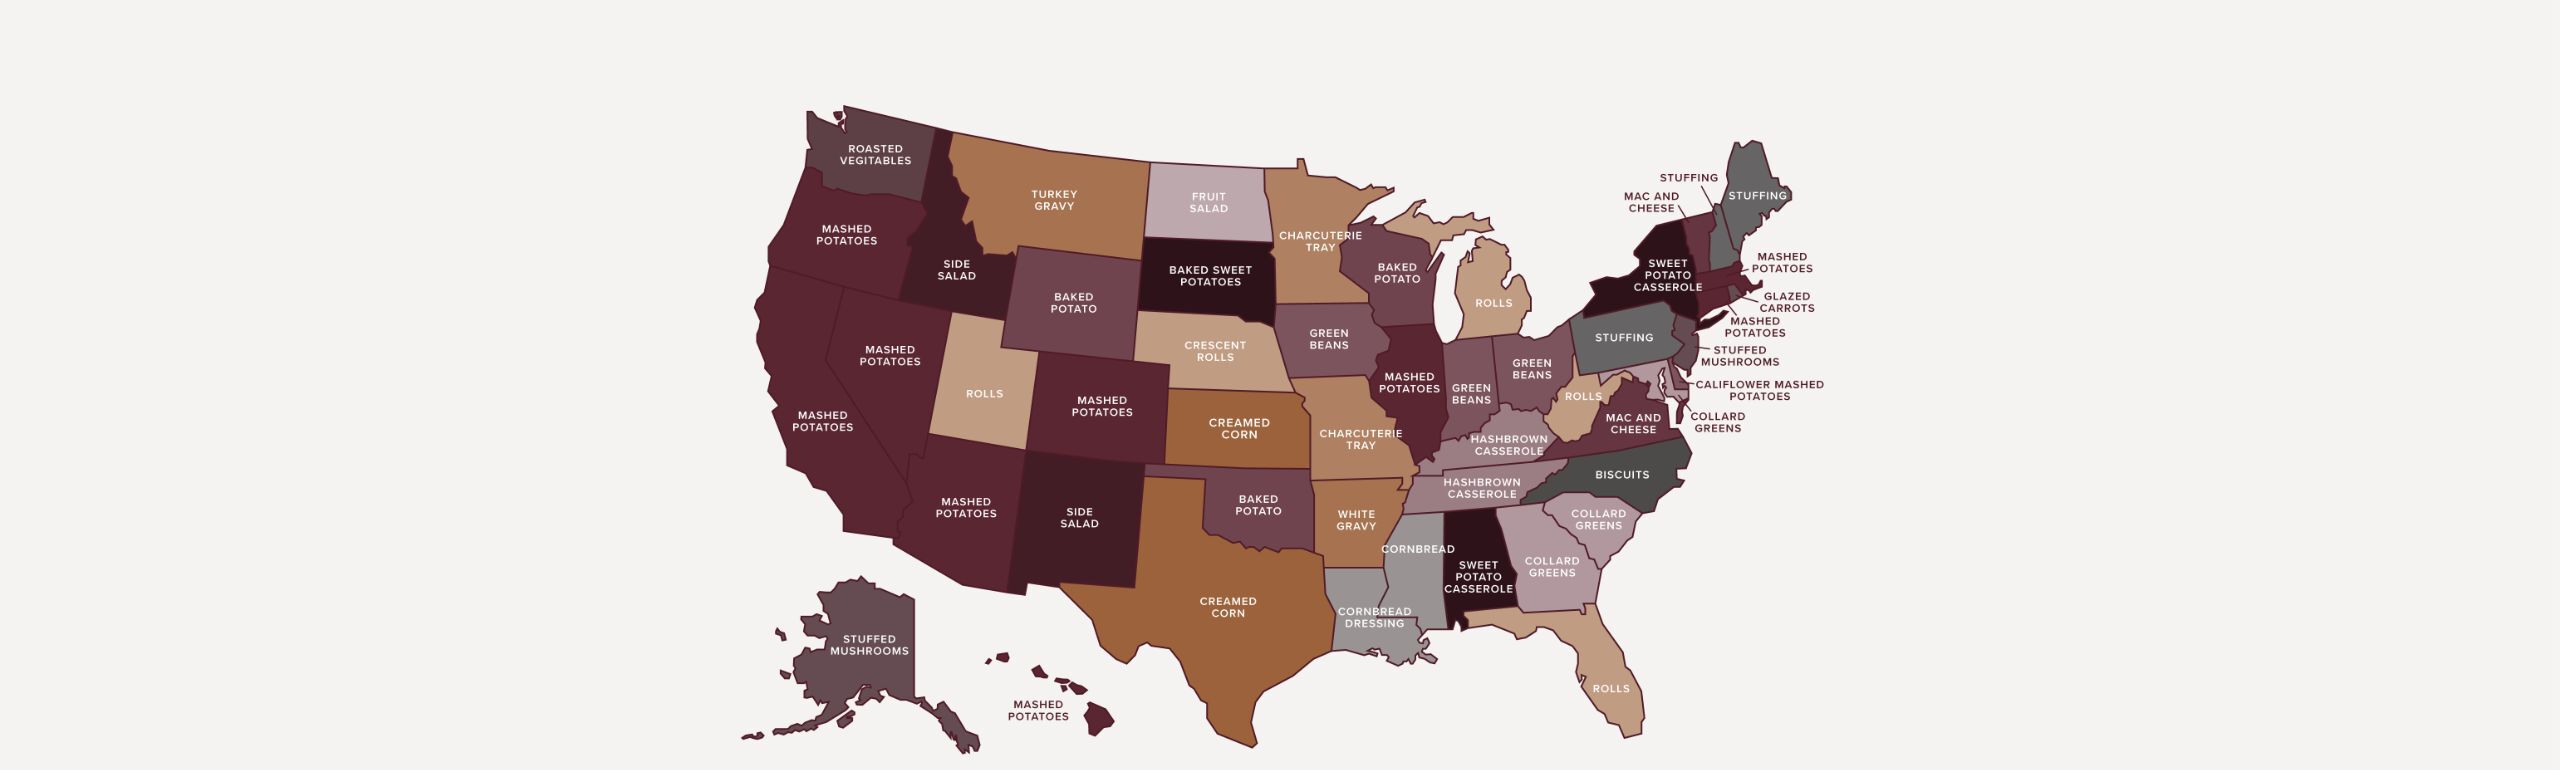 Map of the USA showing popular Thanksgiving side dishes by state